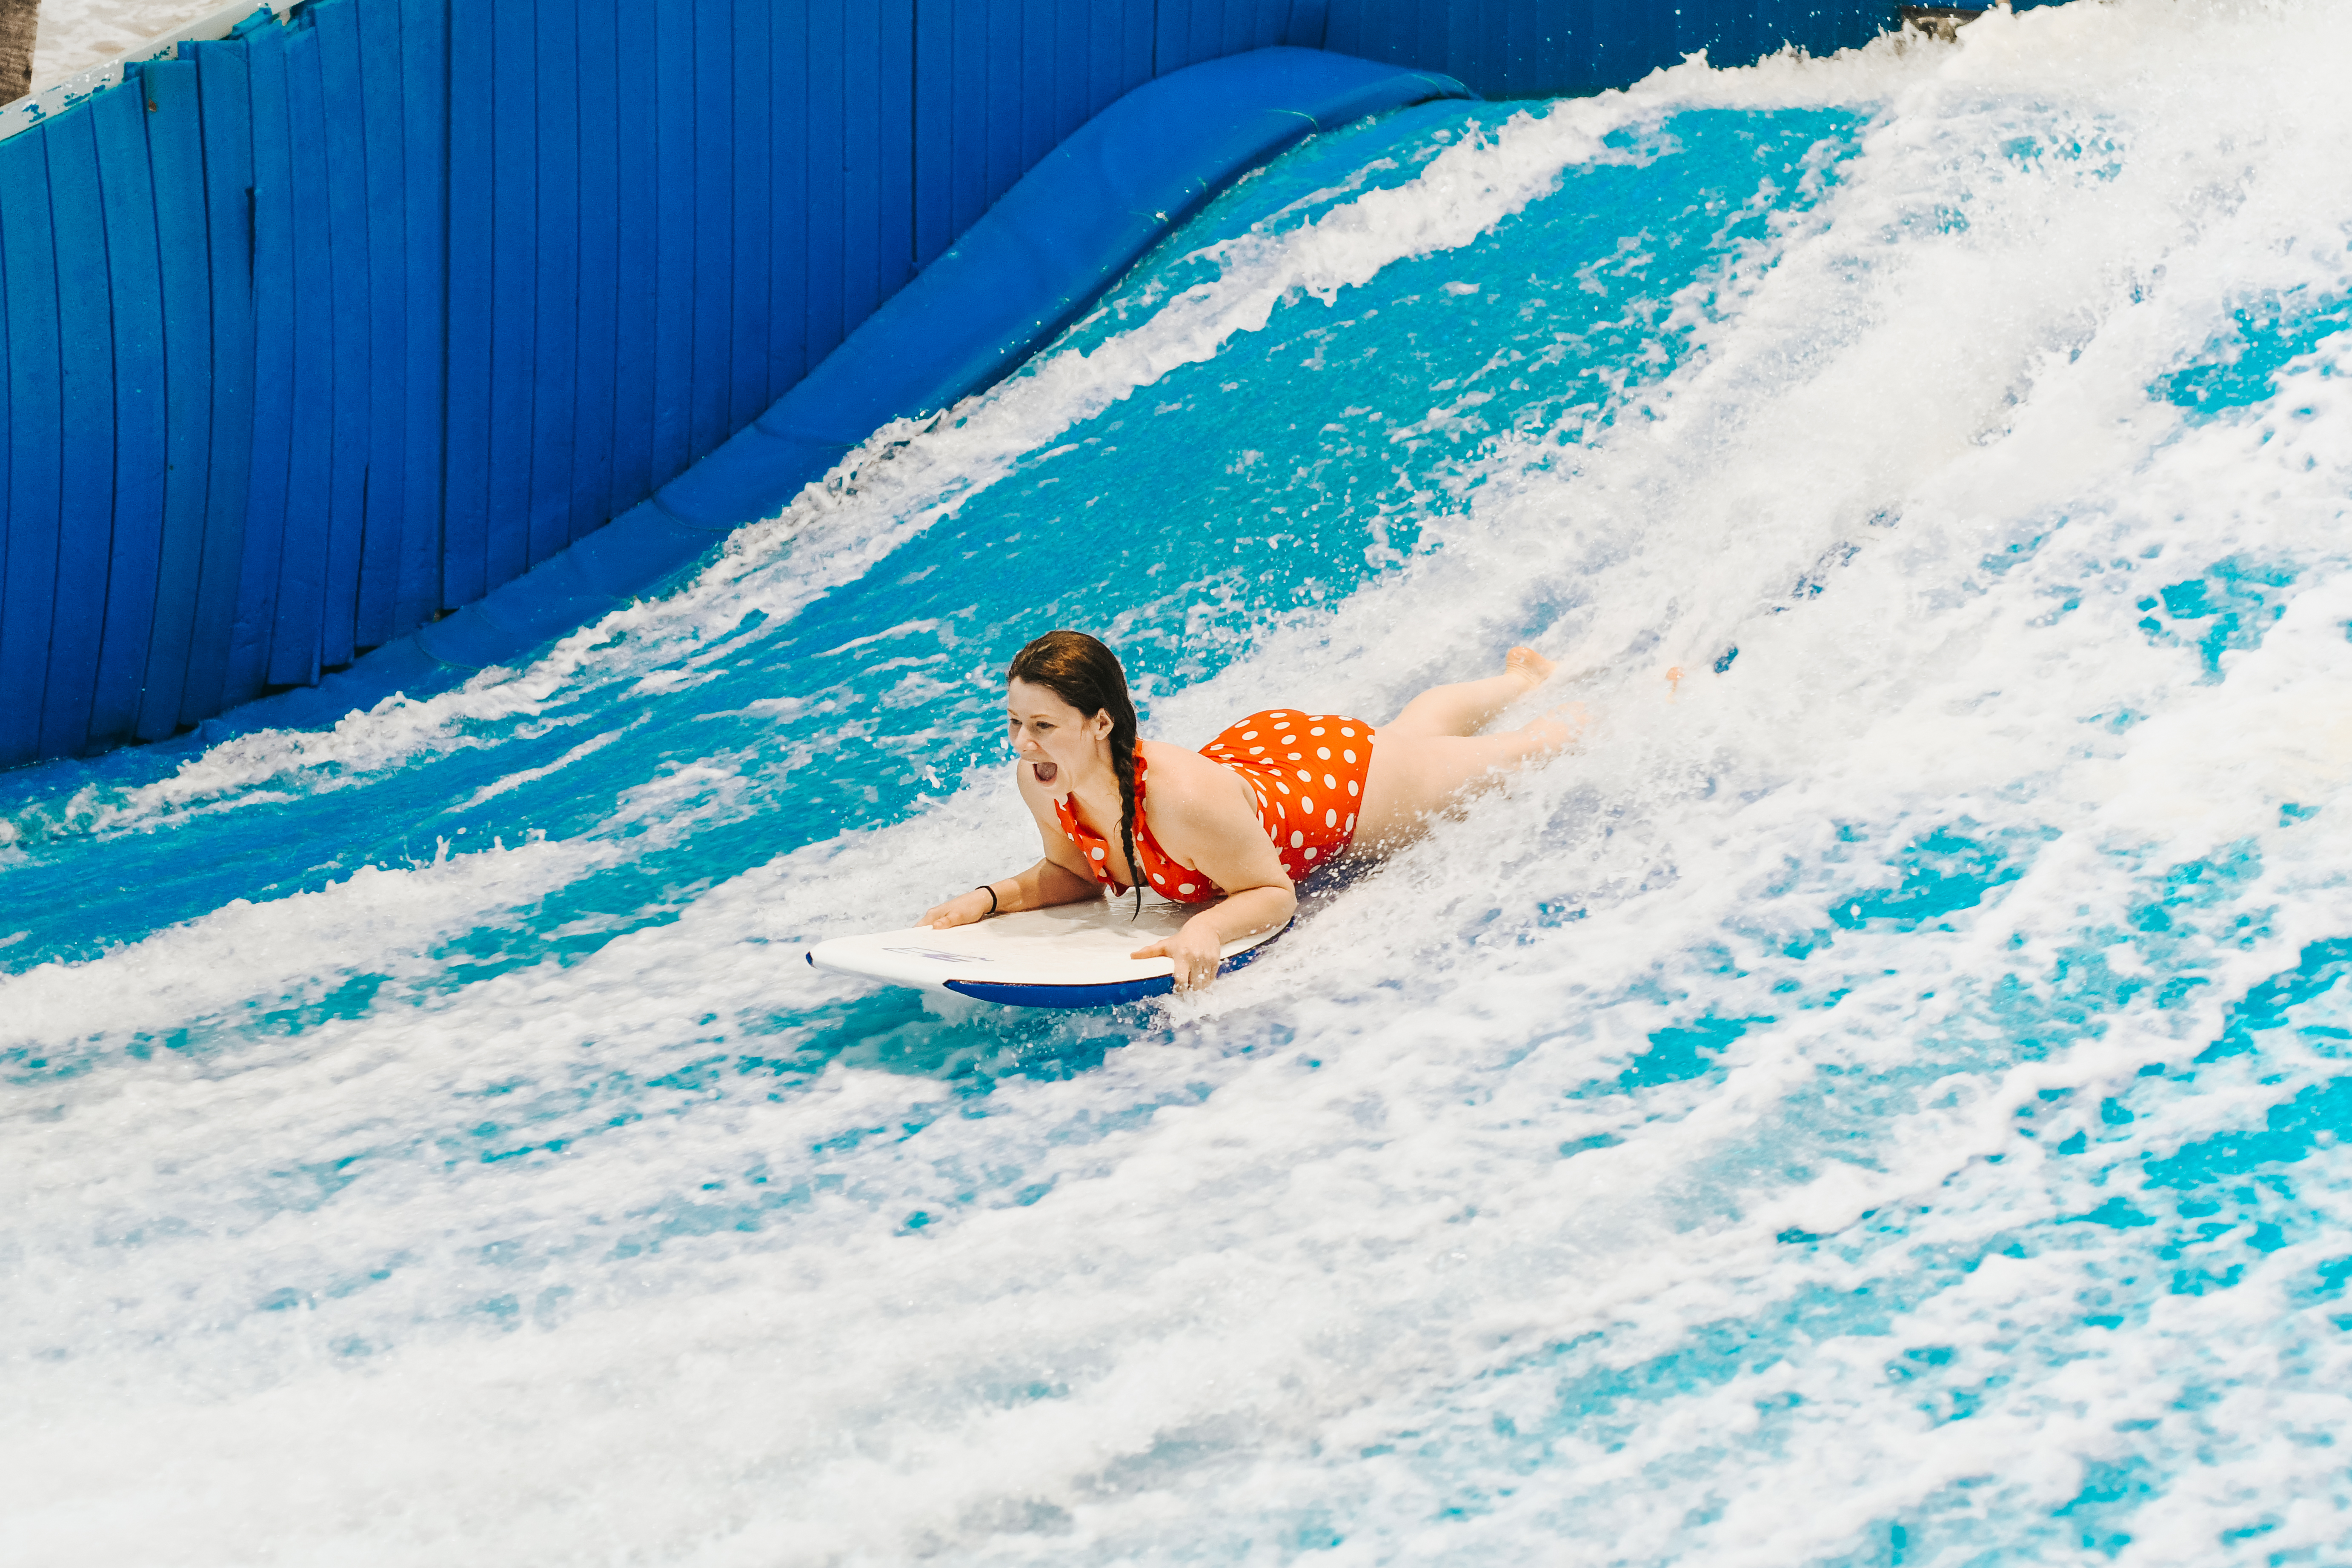 jami savage lying on stomach on surfboard at laval indoor surfing